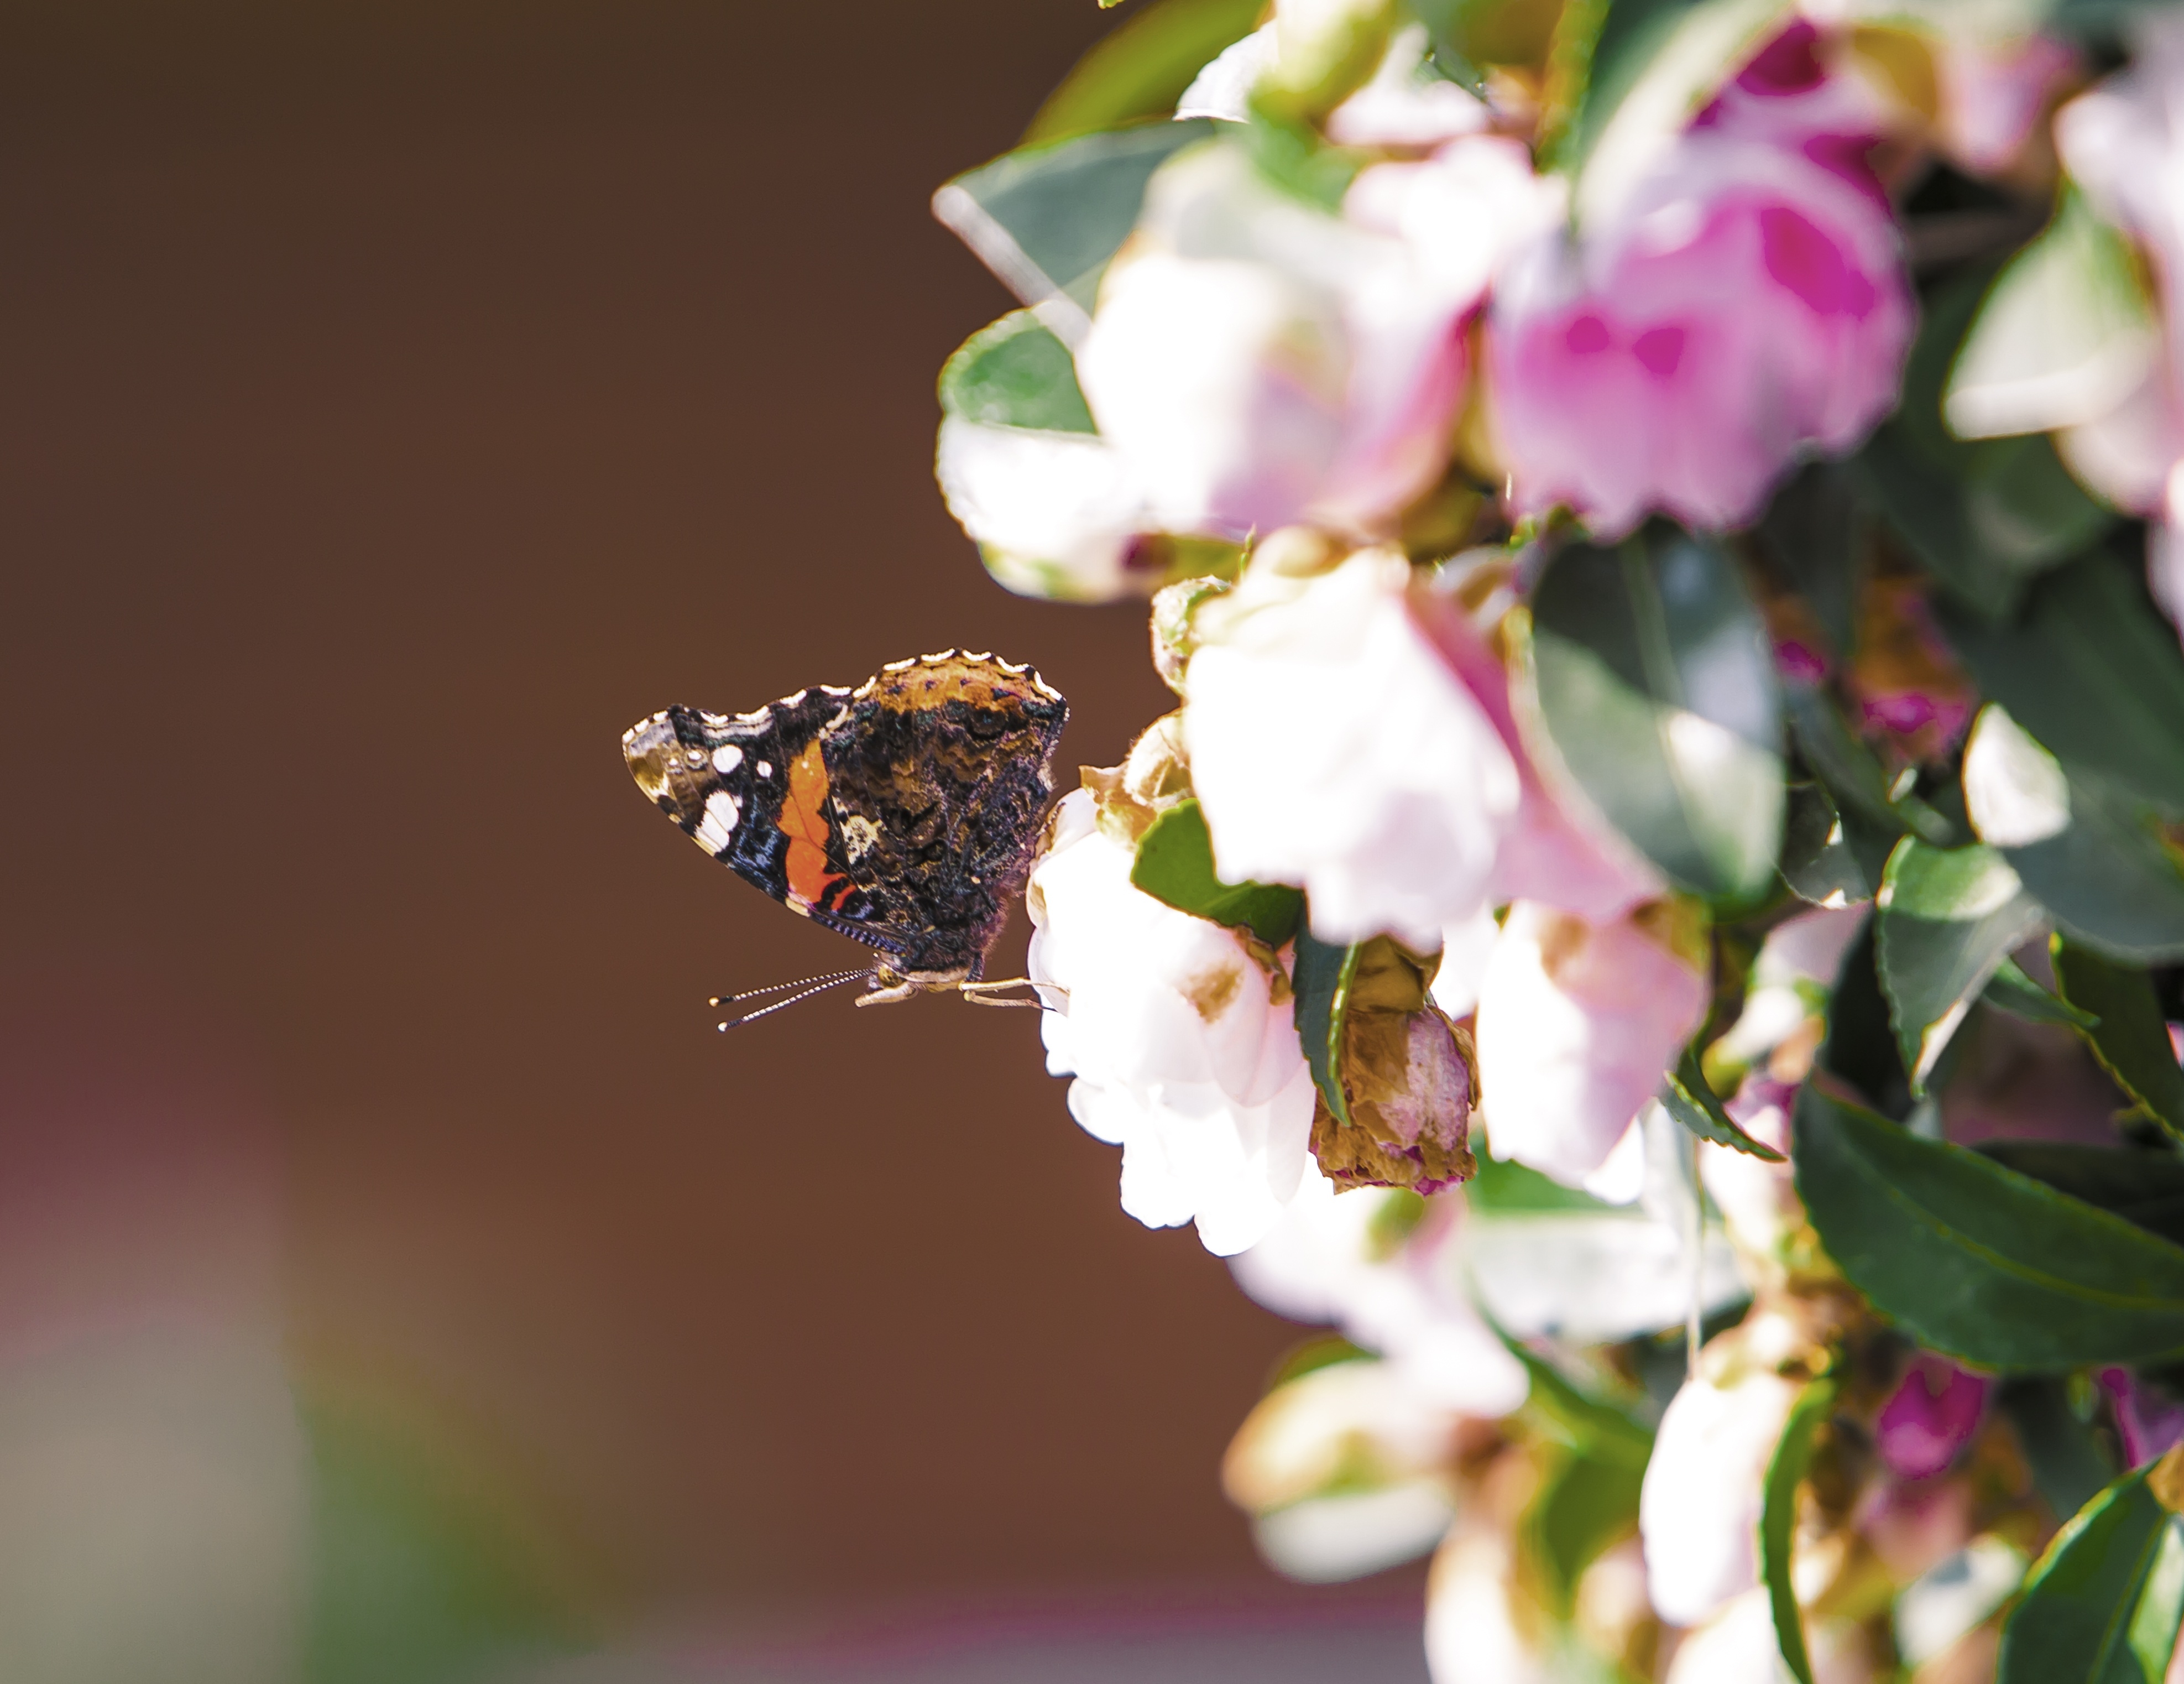 A butterfly sits on a shrub with flowers.